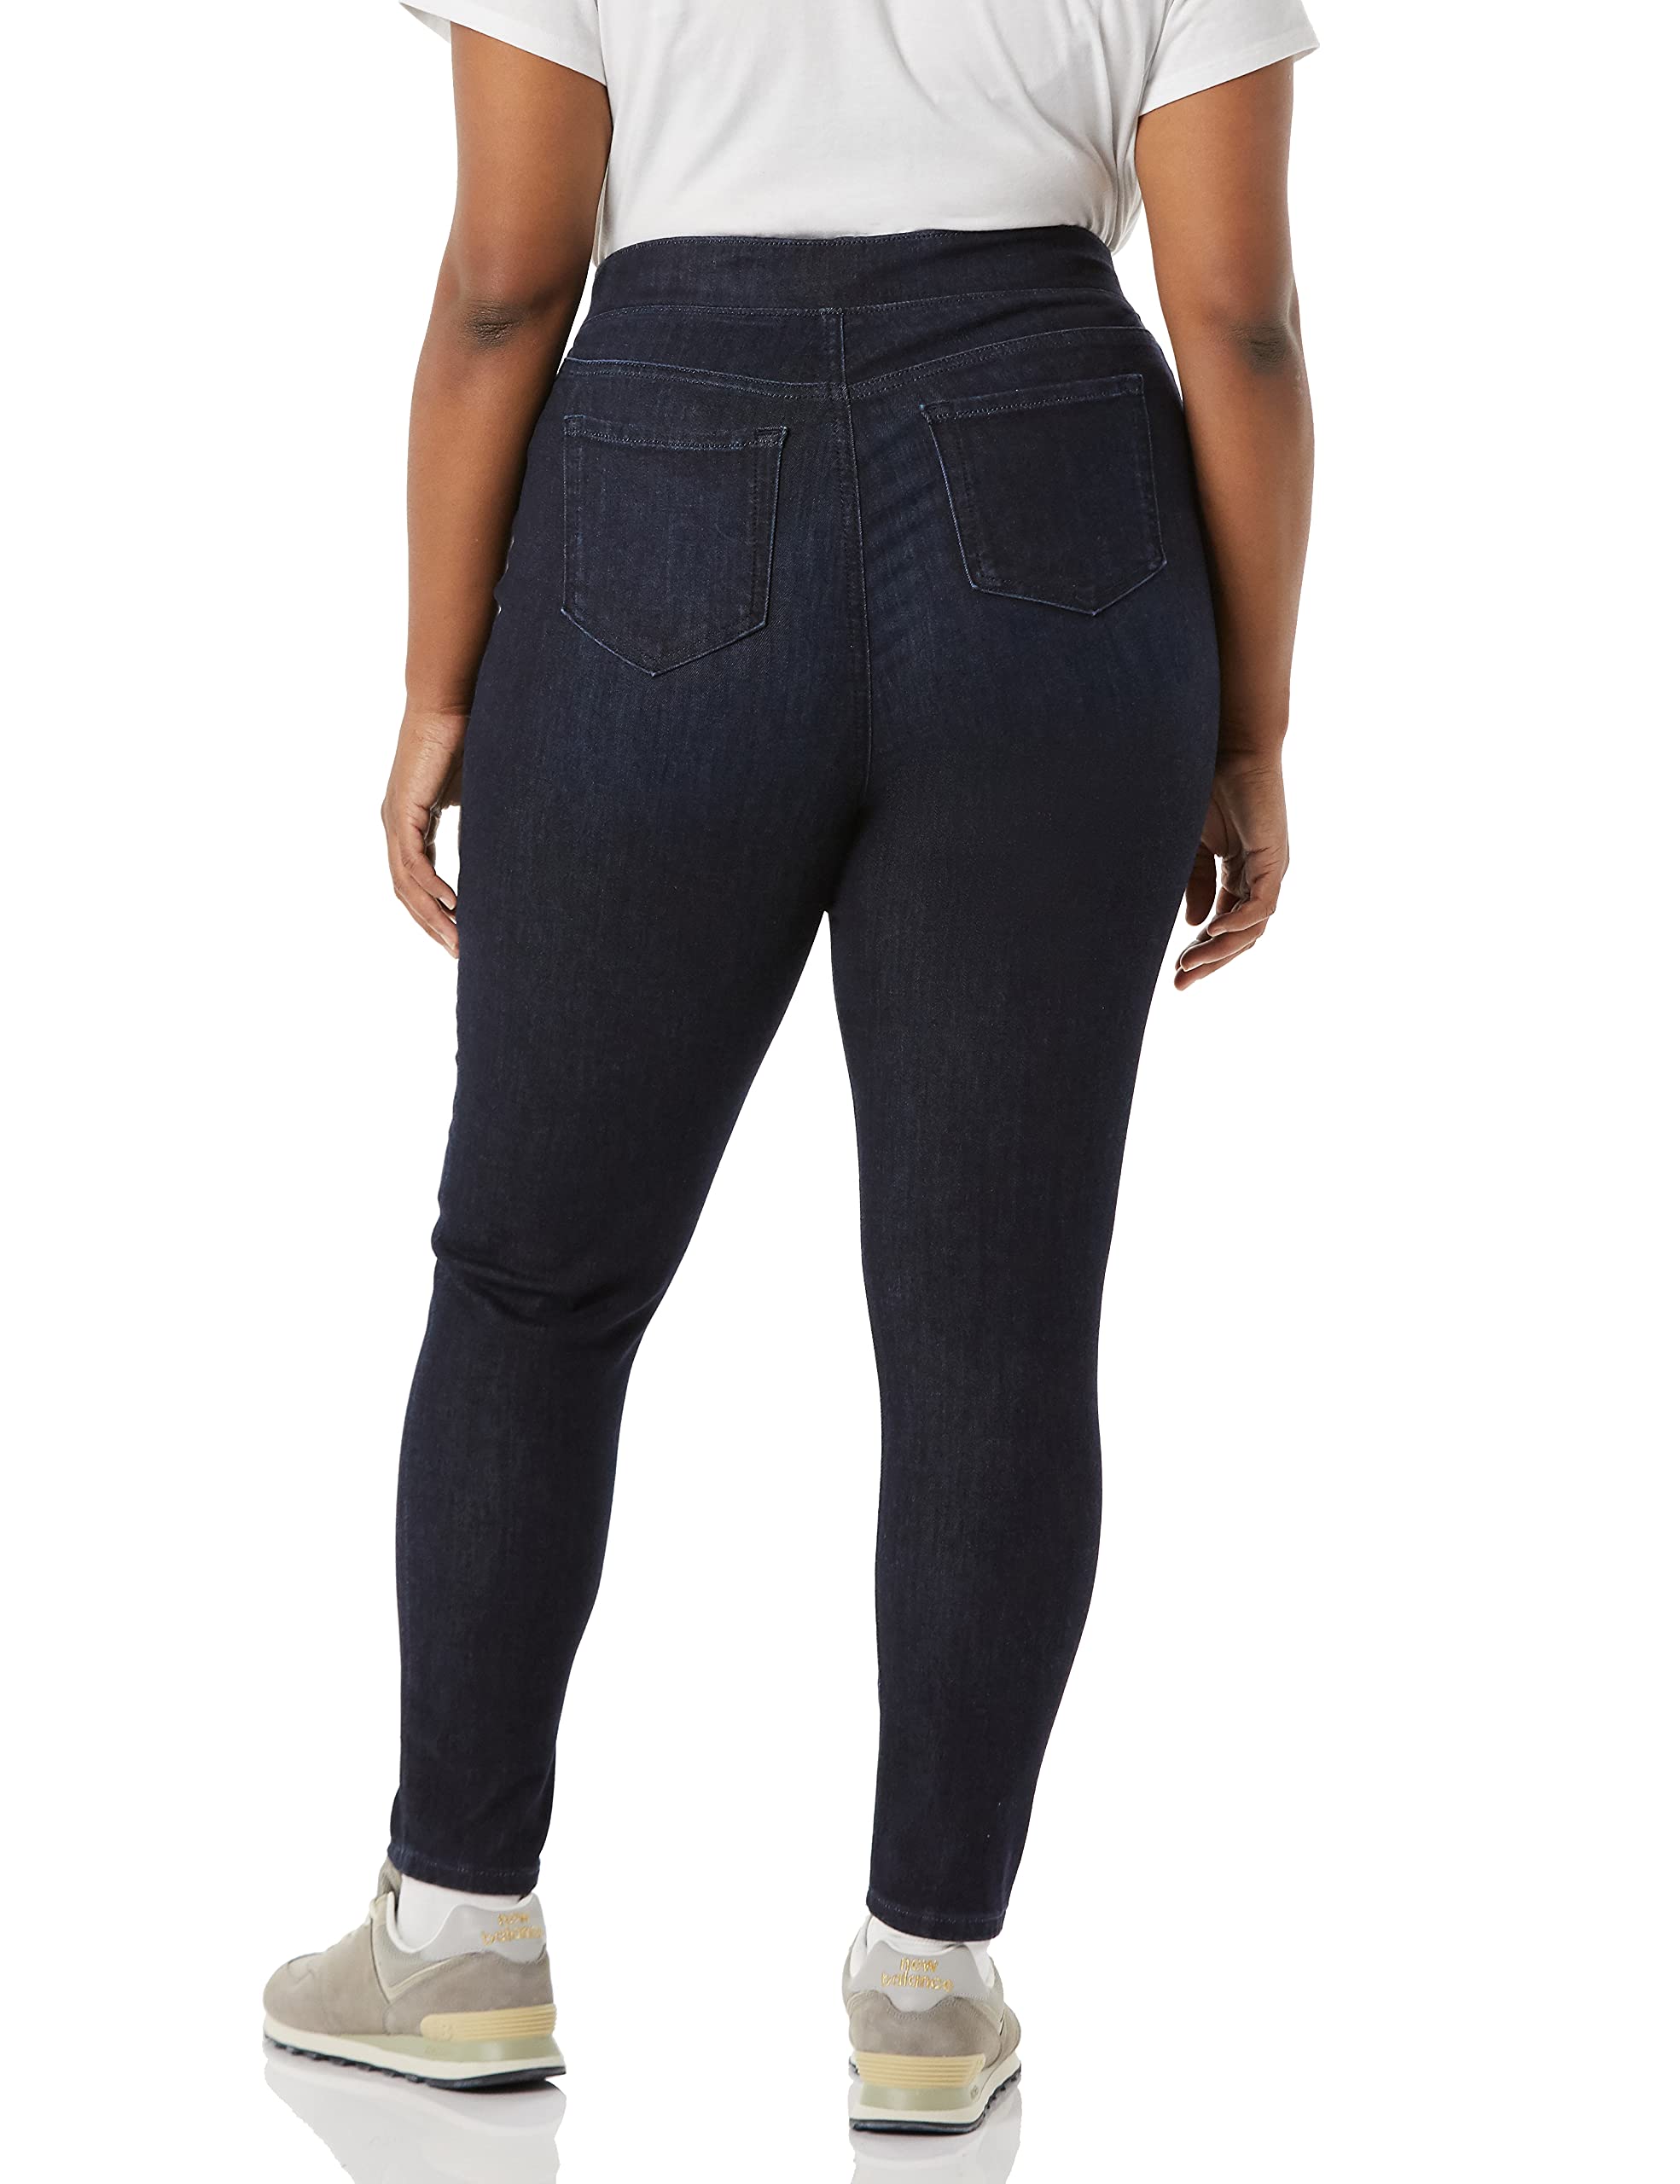 Amazon Essentials Women's Stretch Pull-On Jegging (Available in Plus Size)